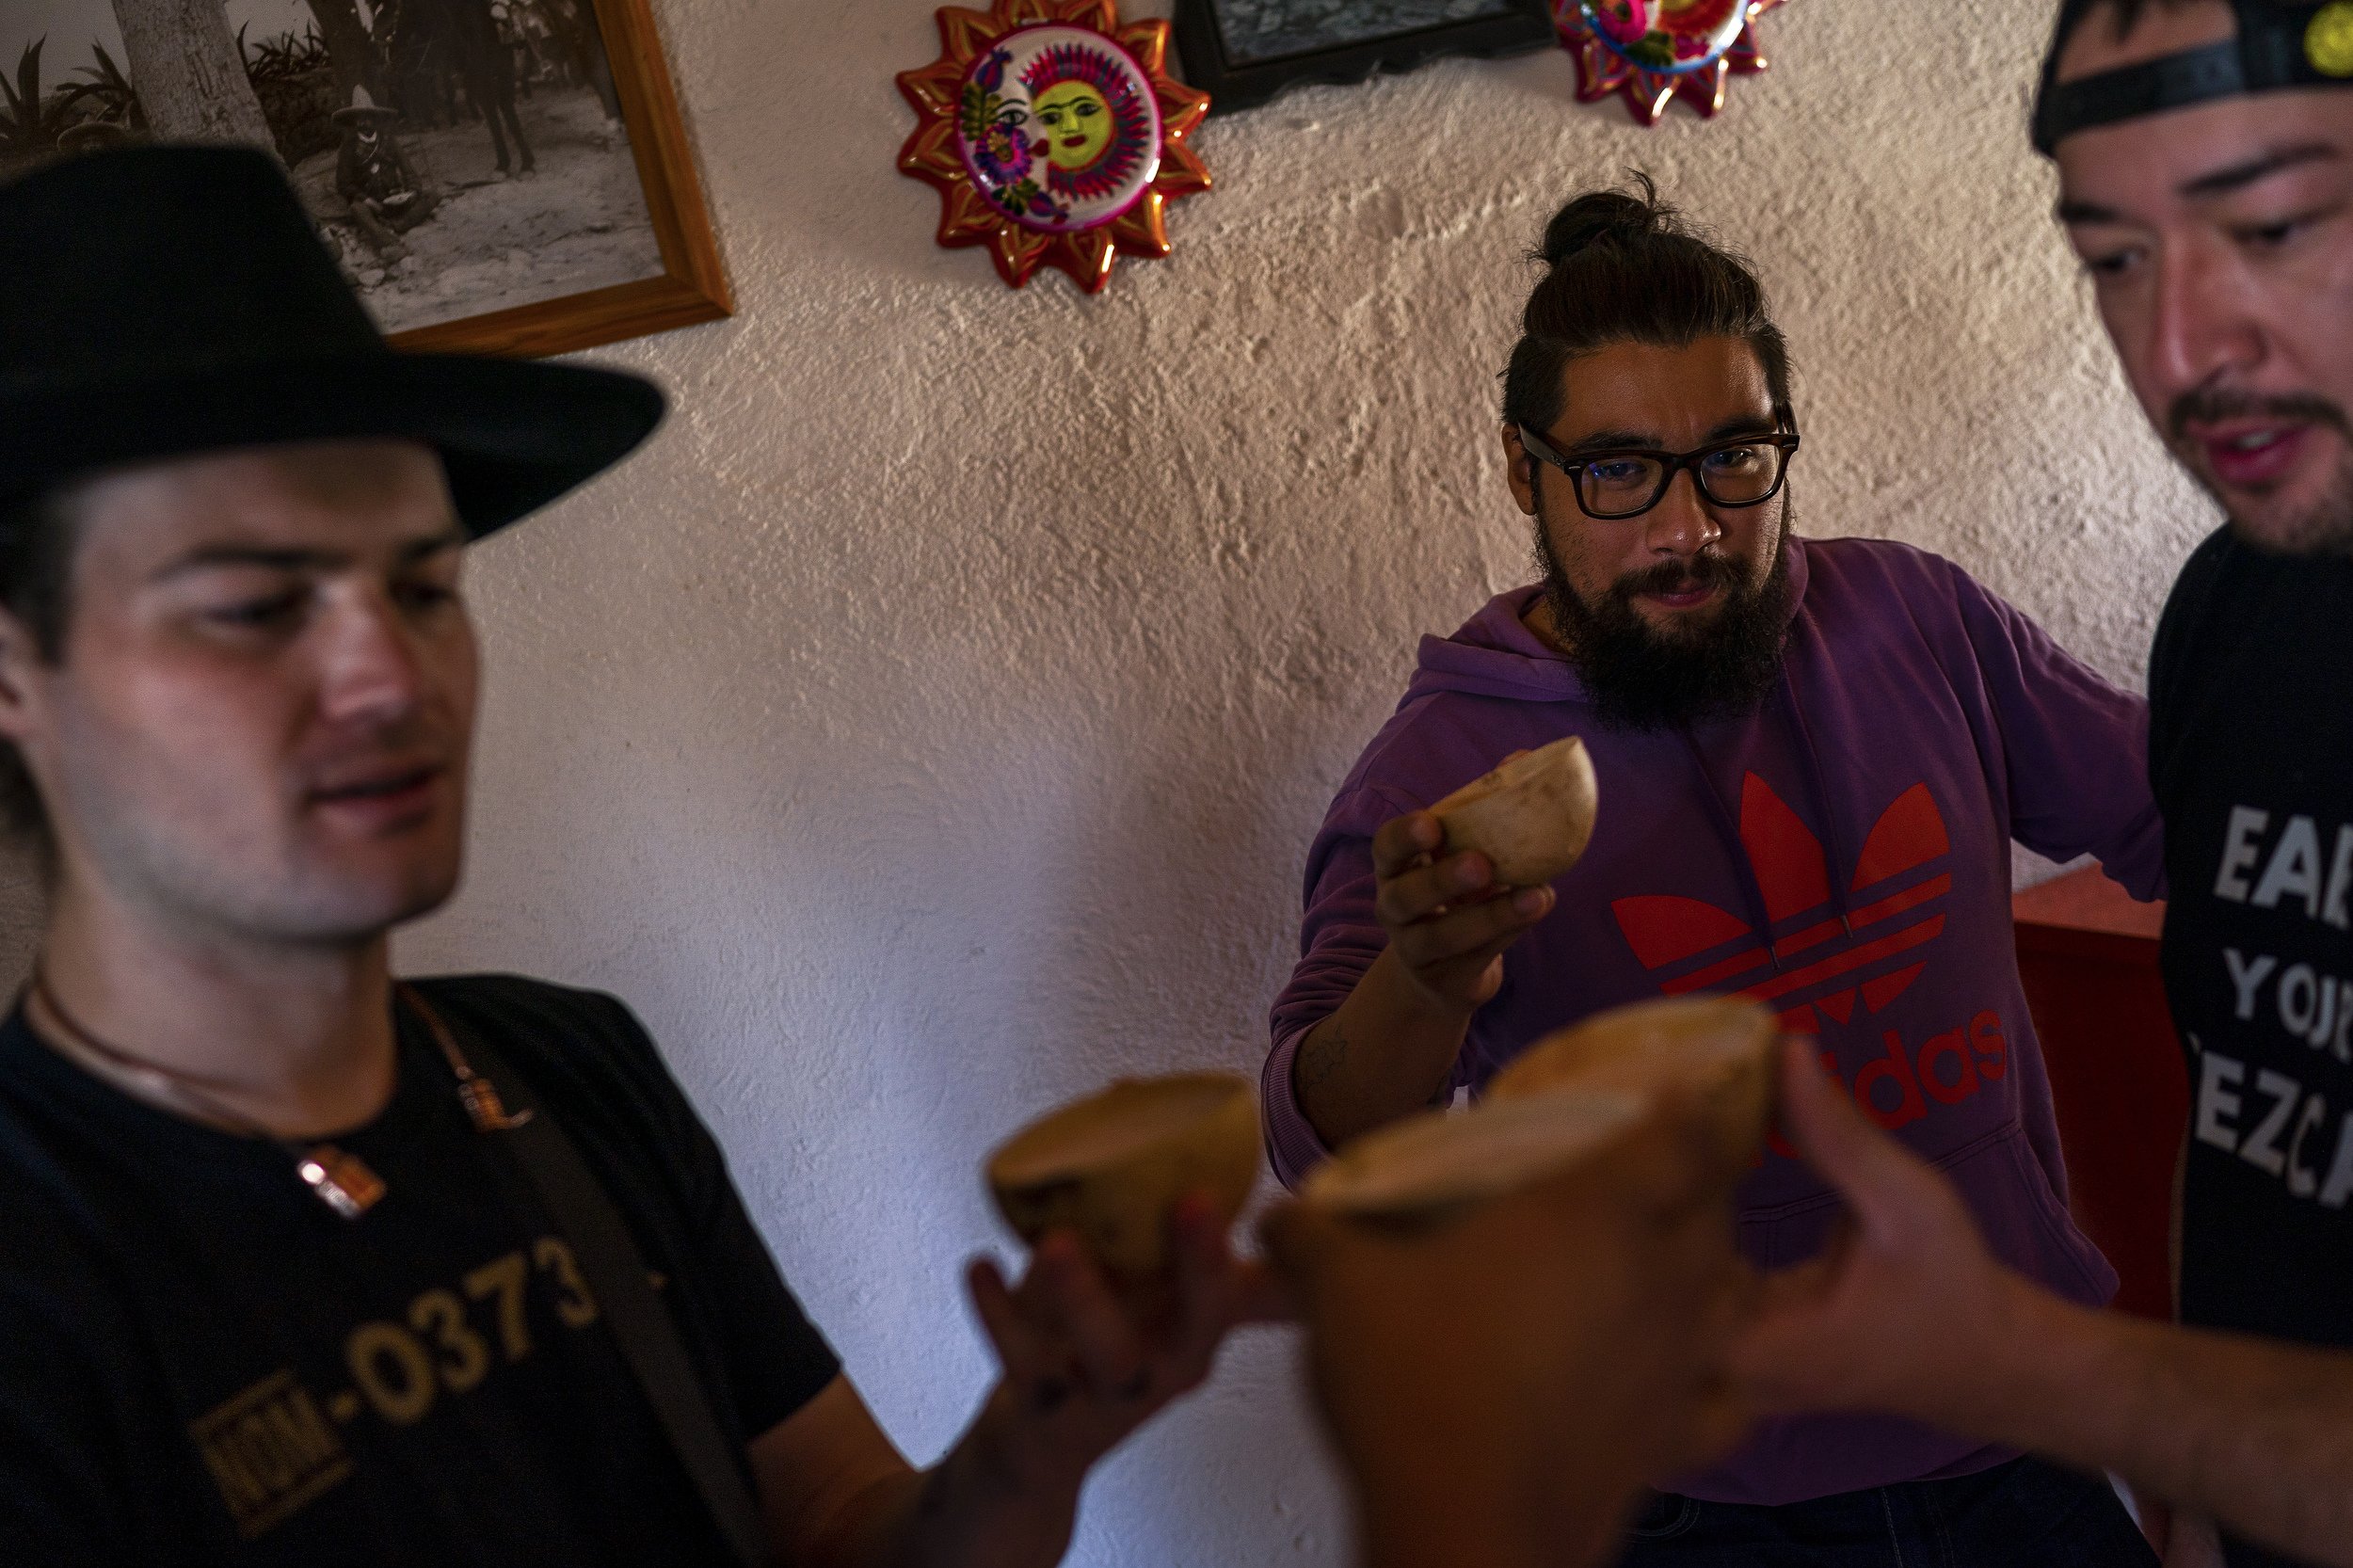  From left, Caleb West, Daniel Soria and Iván Carreño drink pulque at El Pulquito de Matatlán on Dec. 8, 2021, in Santiago Matatlán, Oaxaca, Mexico. Pulque is juice of the agave heart which was originally consumed before the process of distillation w